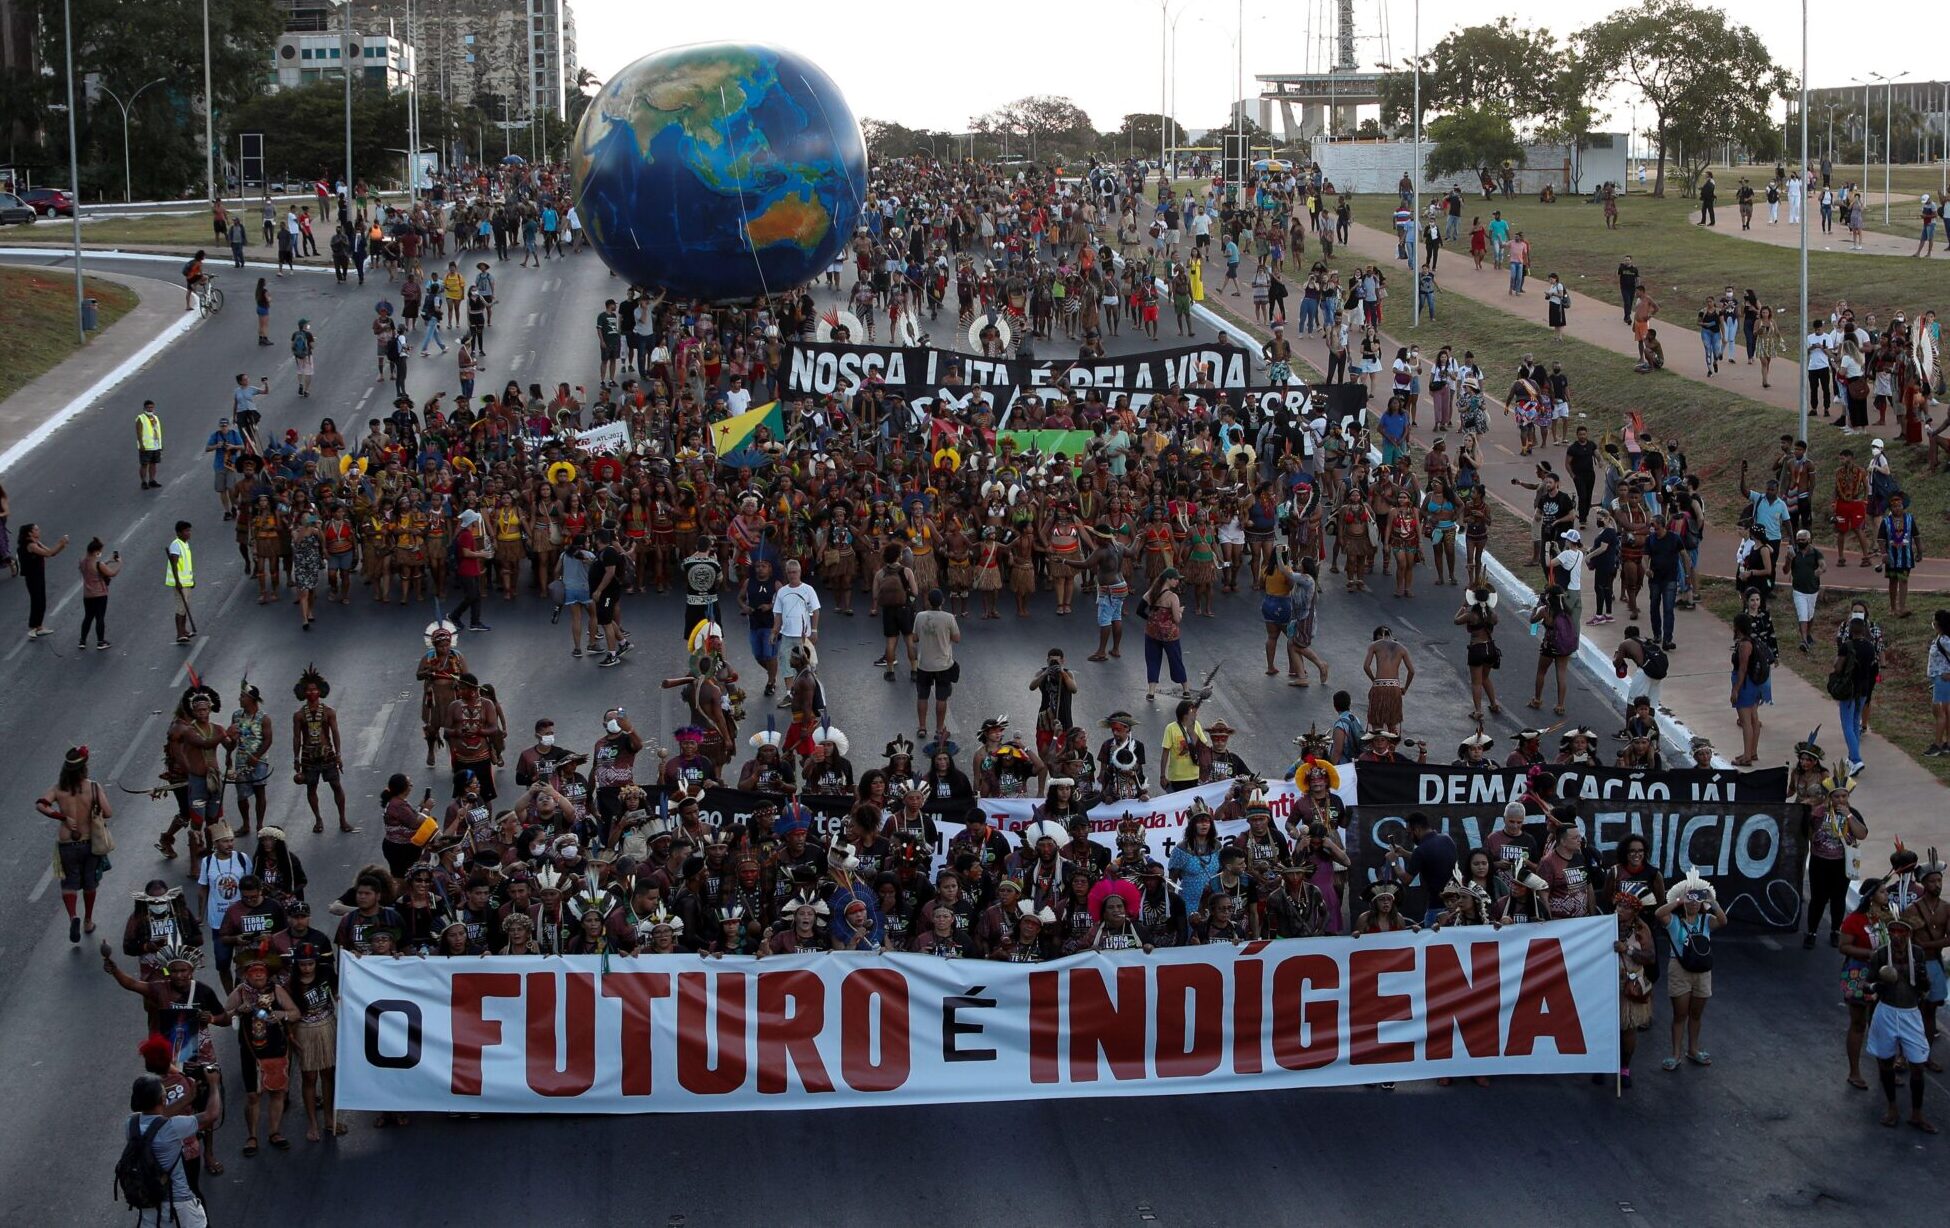 indigenous people march in Brasilia with a banner saying "the future is indigenous".